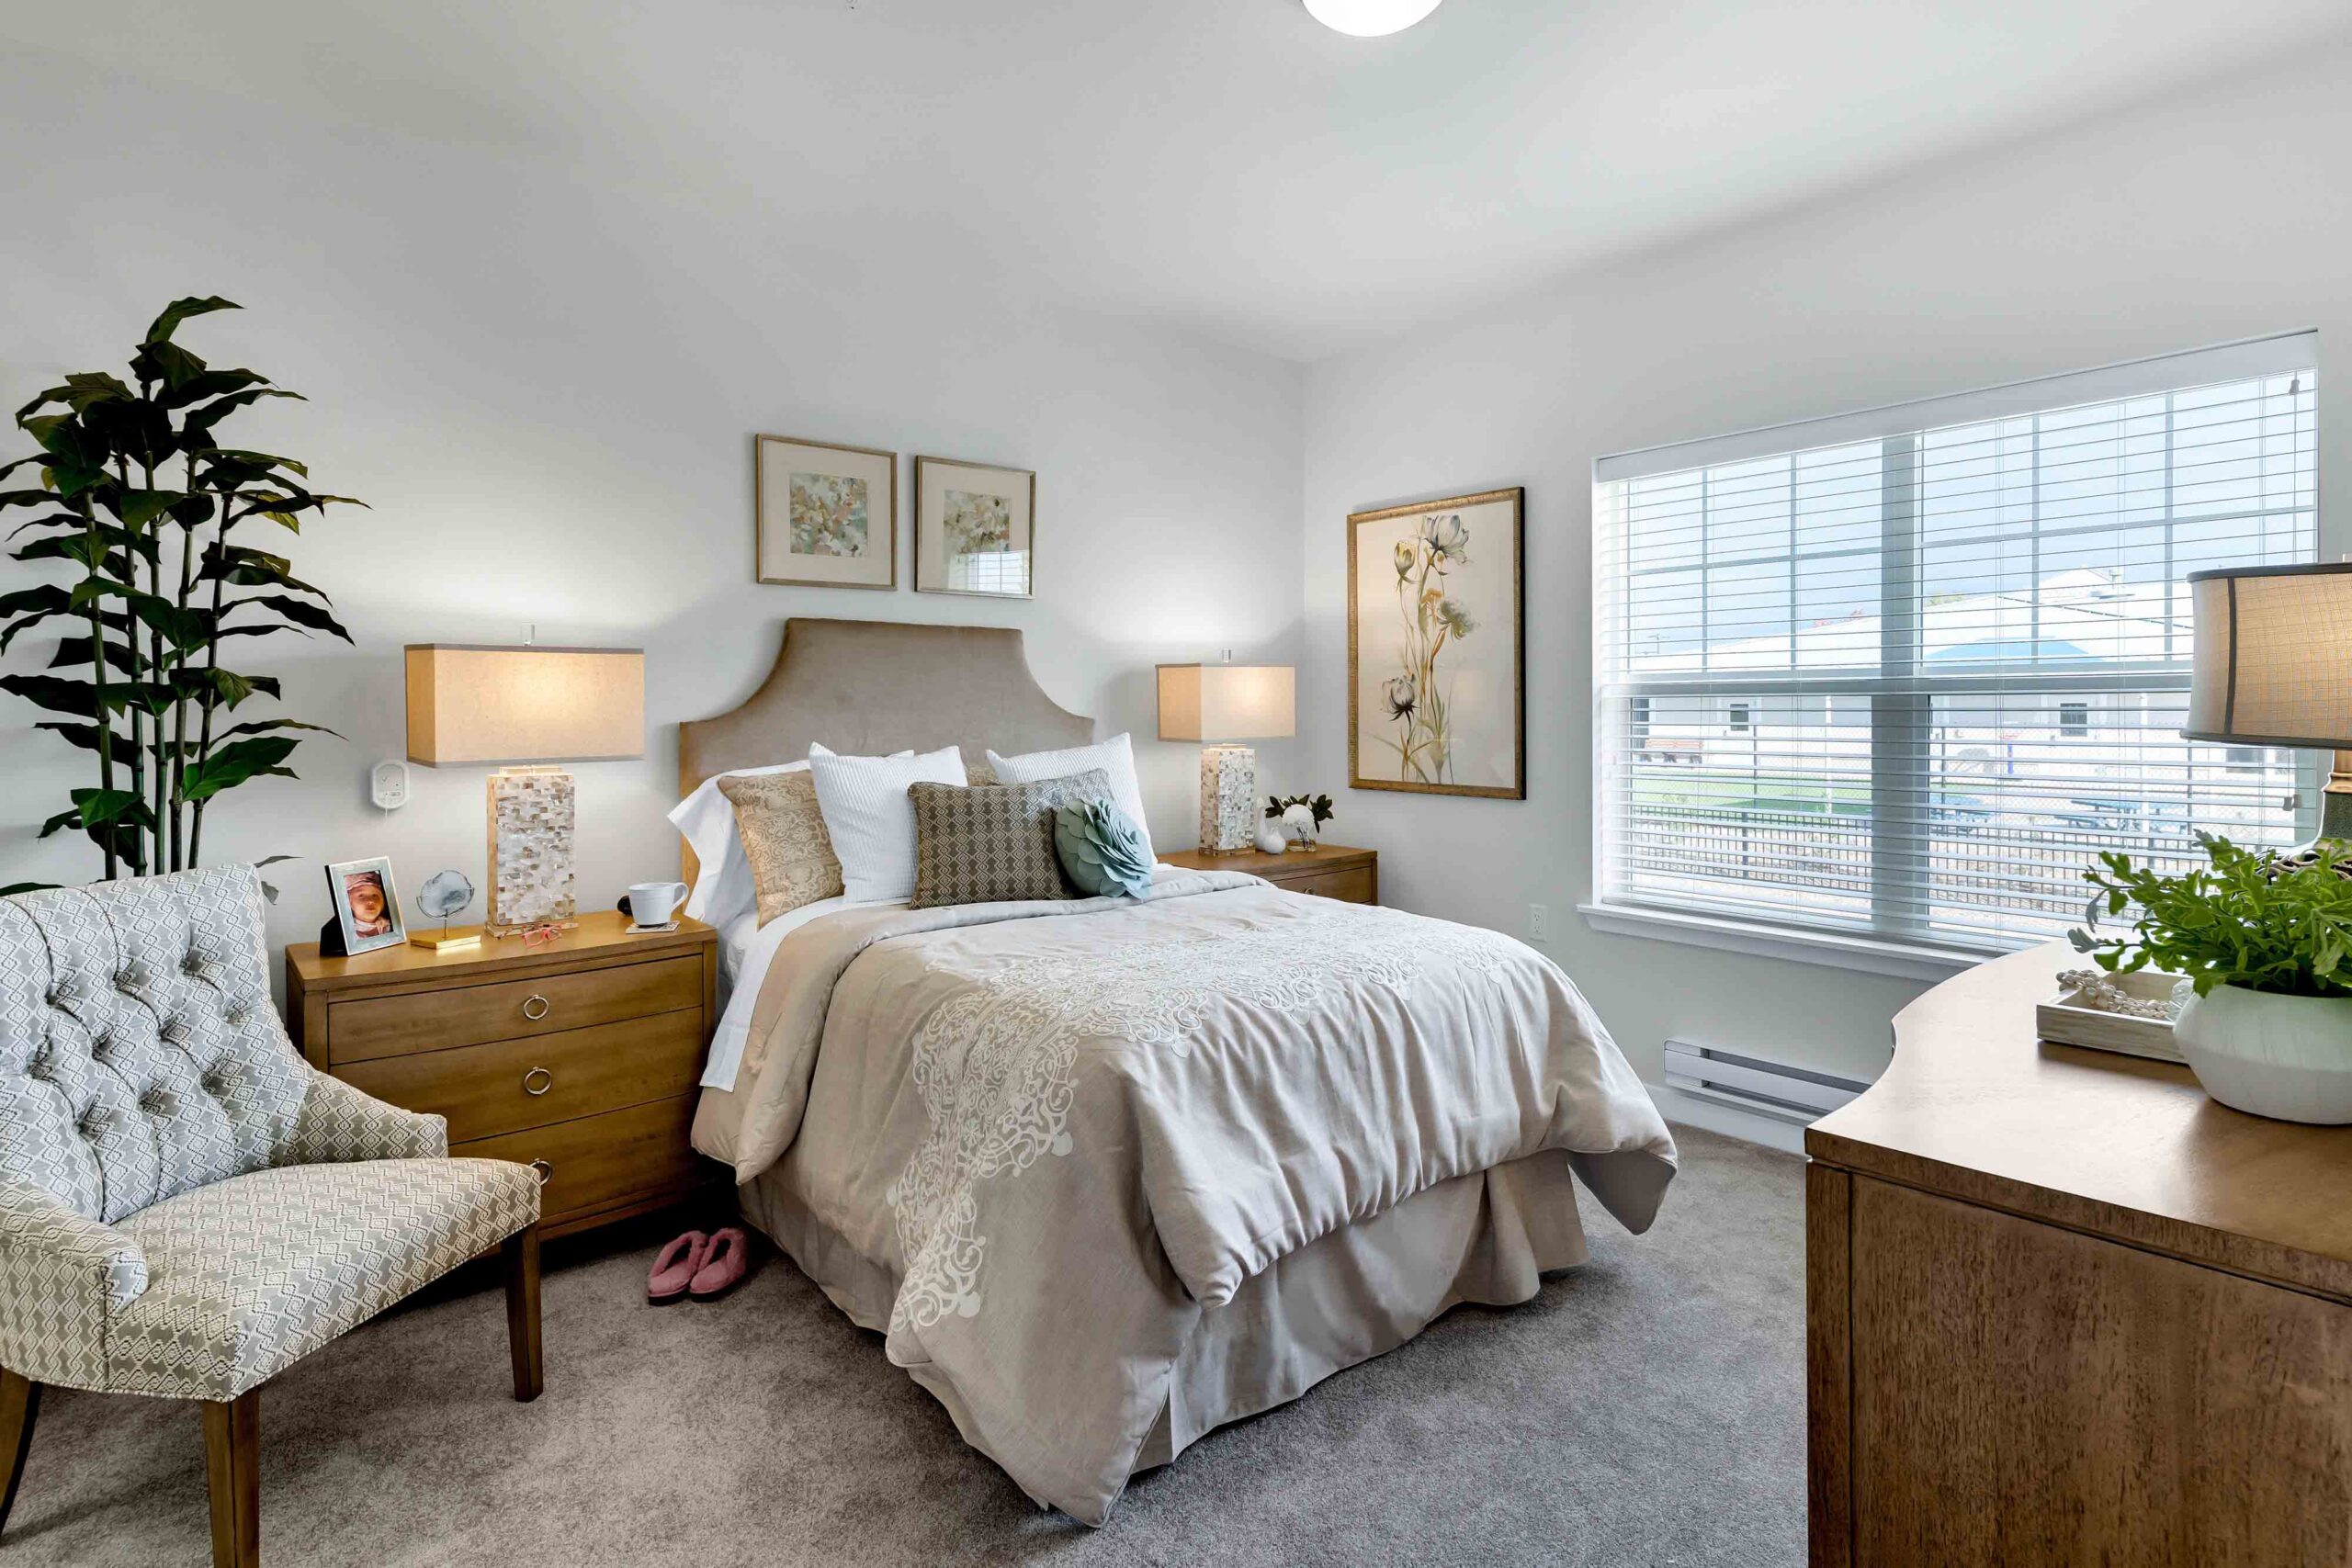 A cozy bedroom features a bed with beige bedding and decorative pillows, flanked by wooden nightstands with lamps. A small cushioned chair, dresser, large potted plants, and framed artwork adorn the space. A large window fills the room with natural light.